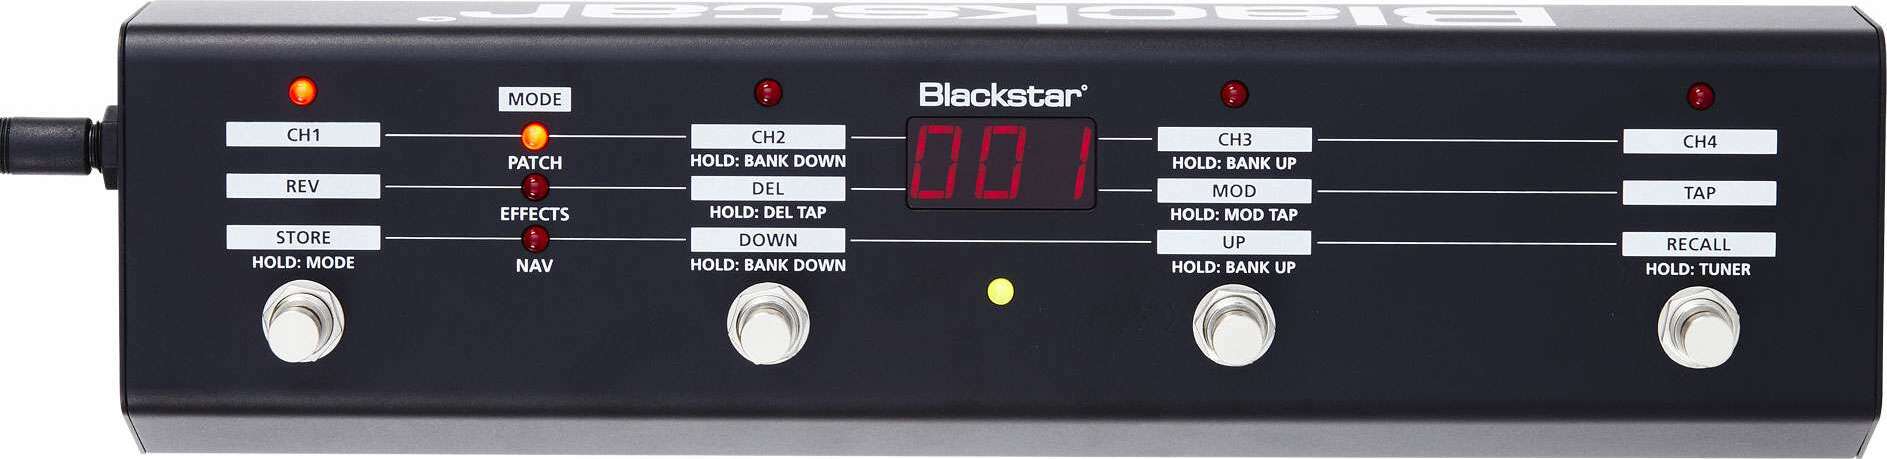 Blackstar Fs10 - Amp footswitch - Main picture